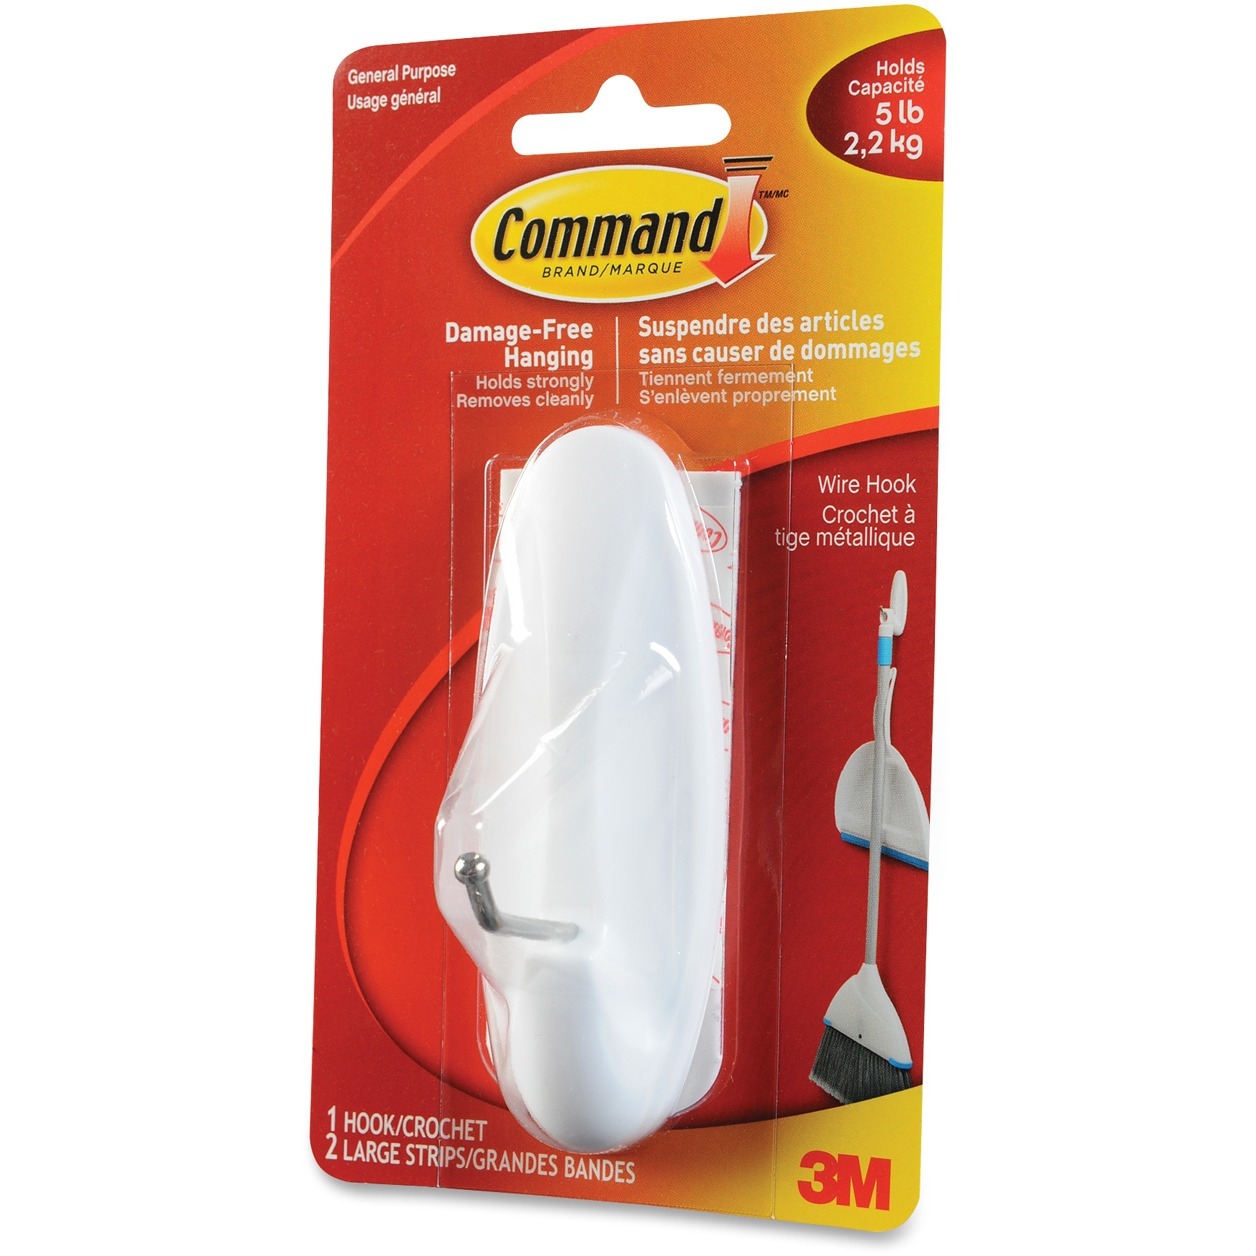 3M Small Hooks with Command Adhesive - 453.6 g Capacity - for